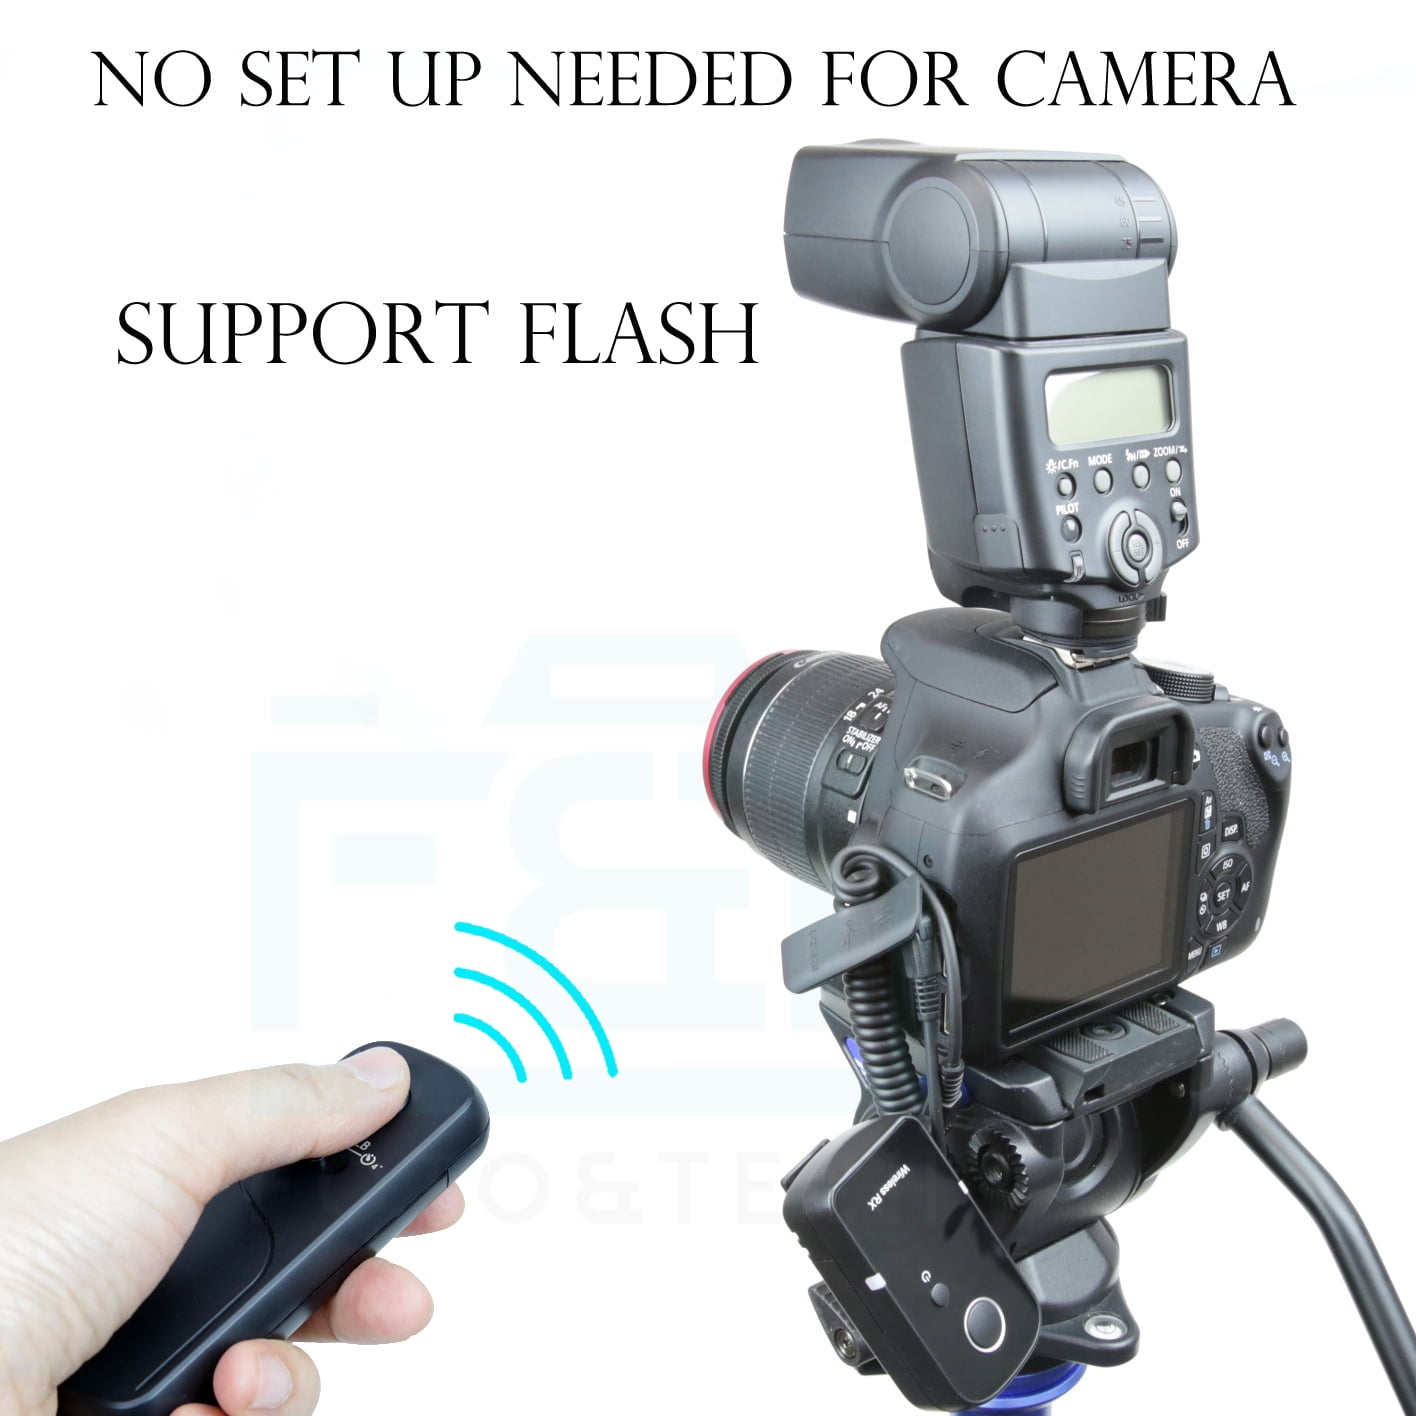 Shutter Release Remote Control,SLR Shutter Release Remote Trigger Photography Accessory Support Focus Shutter Release,BULB Shooting for Nikon Z7 Z6 D7500 D7200 D7100 D90 Camera